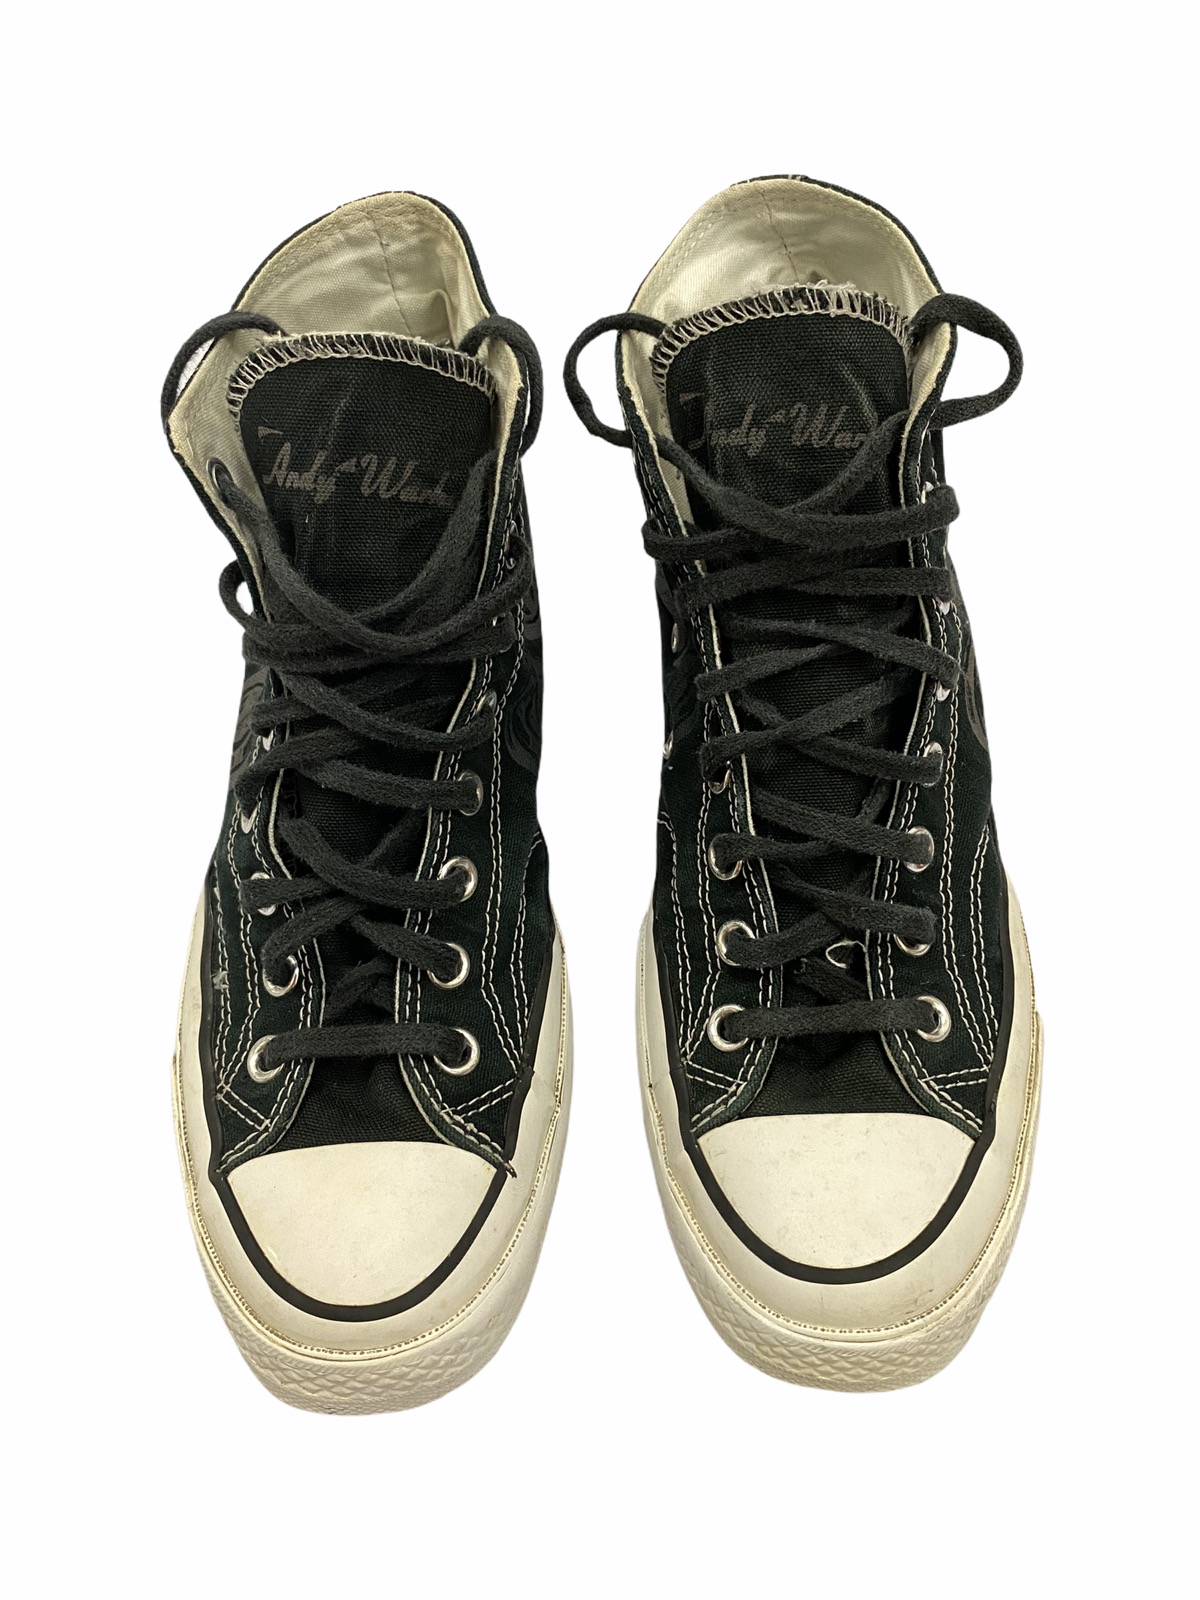 Converse All Star Andy Warhol High Sneaker - 3